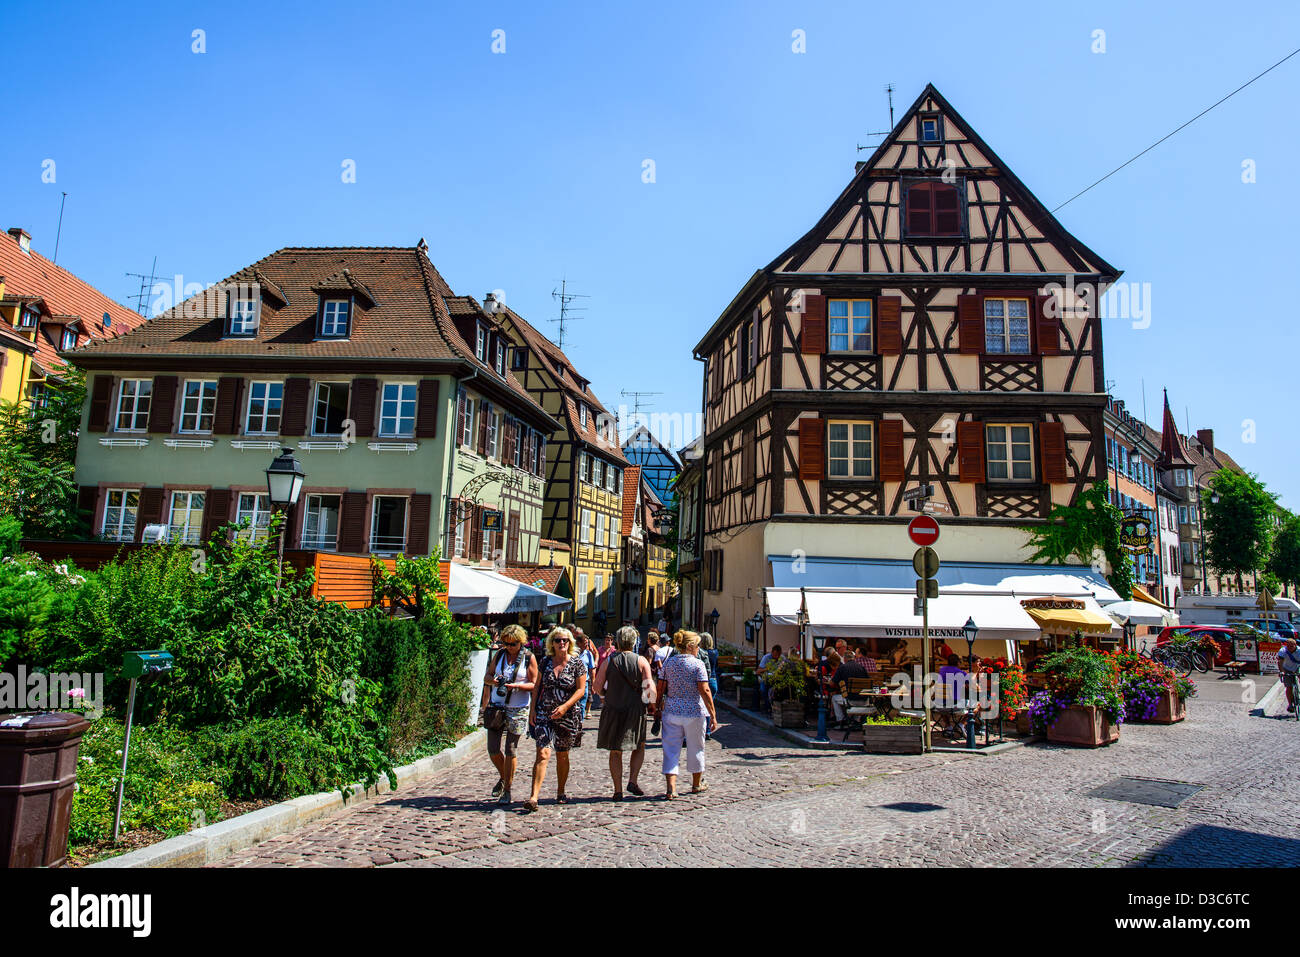 Streen scenery of the old medieval towncenter of Colmar, France Stock Photo